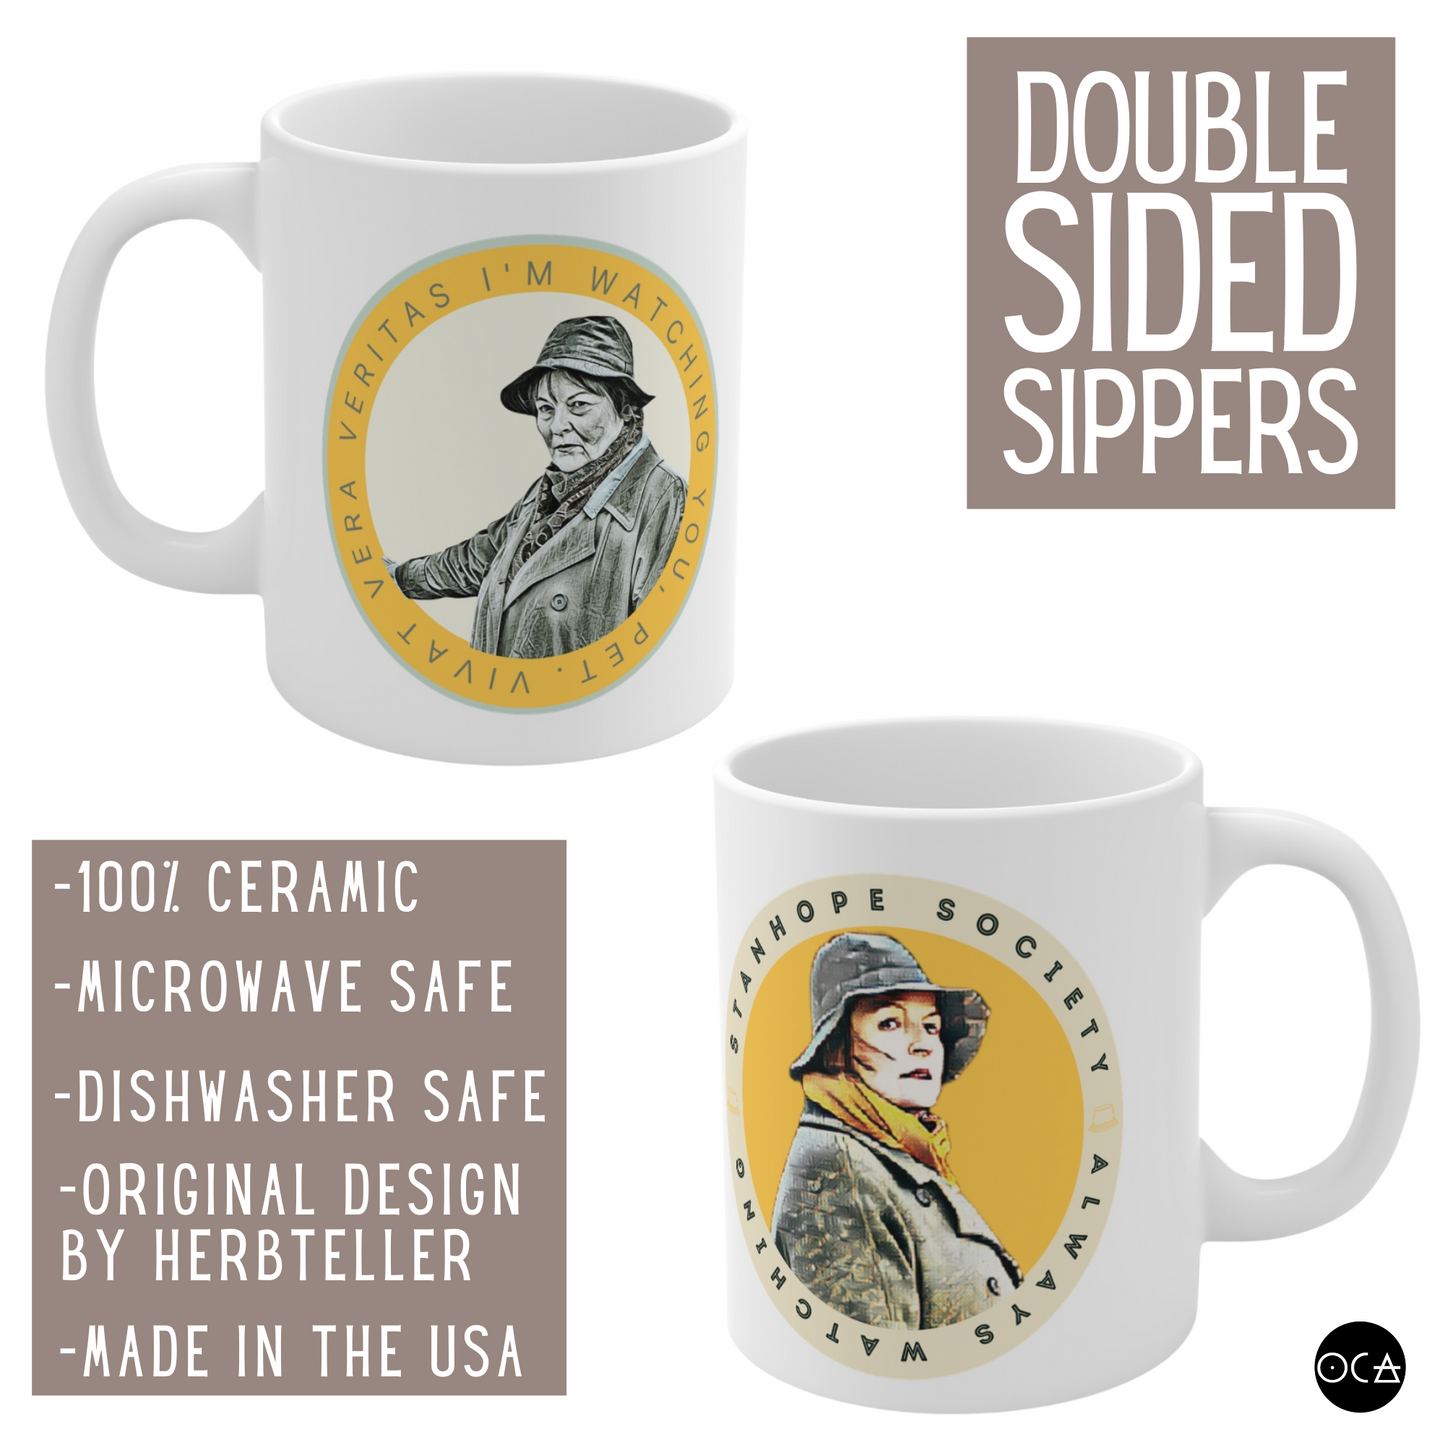 Vera Stanhope Society Mug Inspired by Vera Stanhope DCI (Doublesided/2 different size options)